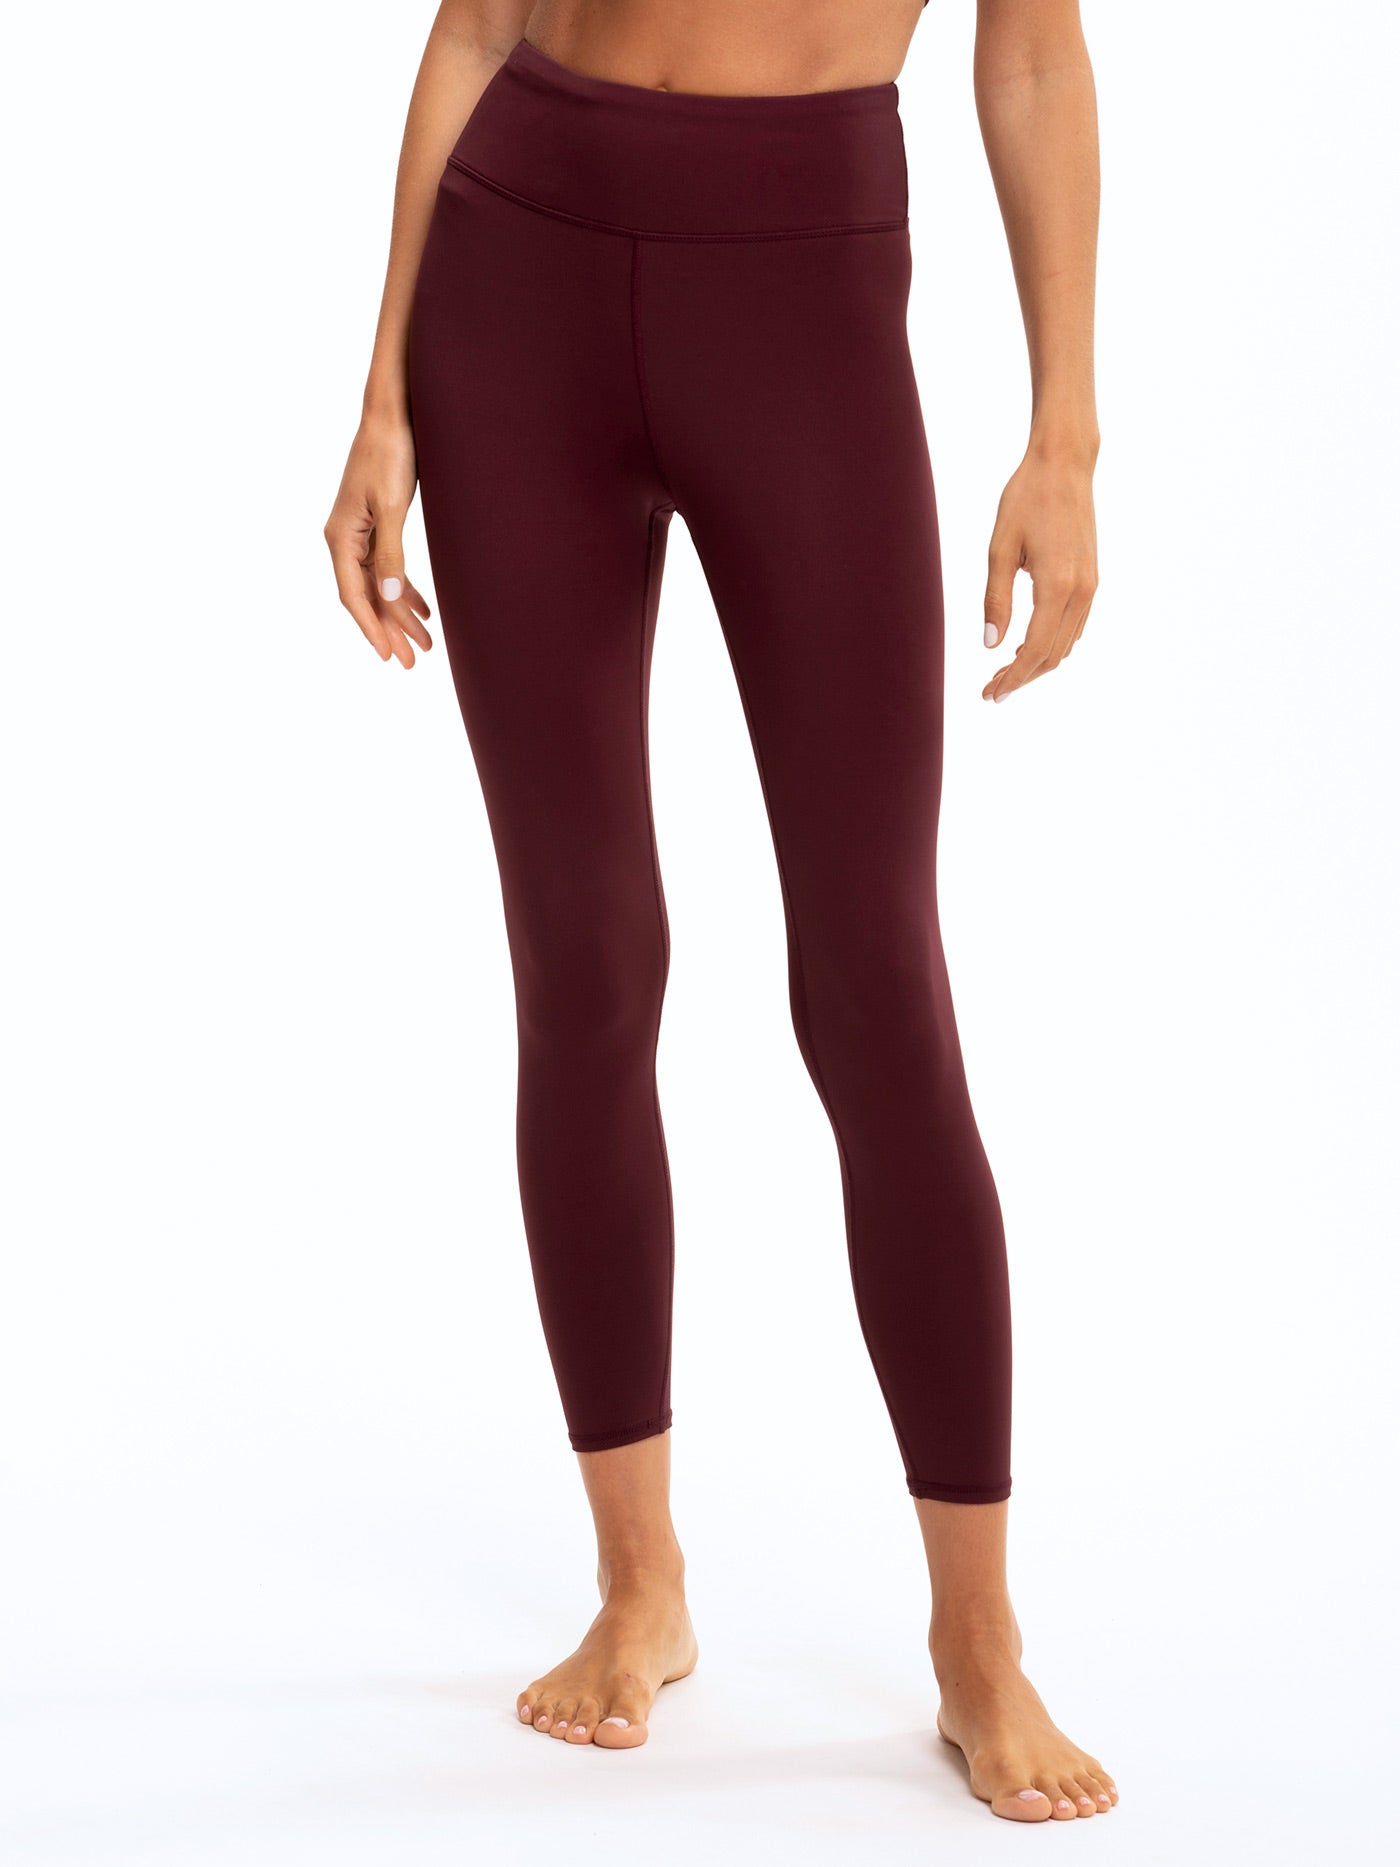 Layna 7/8 Legging - Maroon  Discover and Shop Fair Trade and